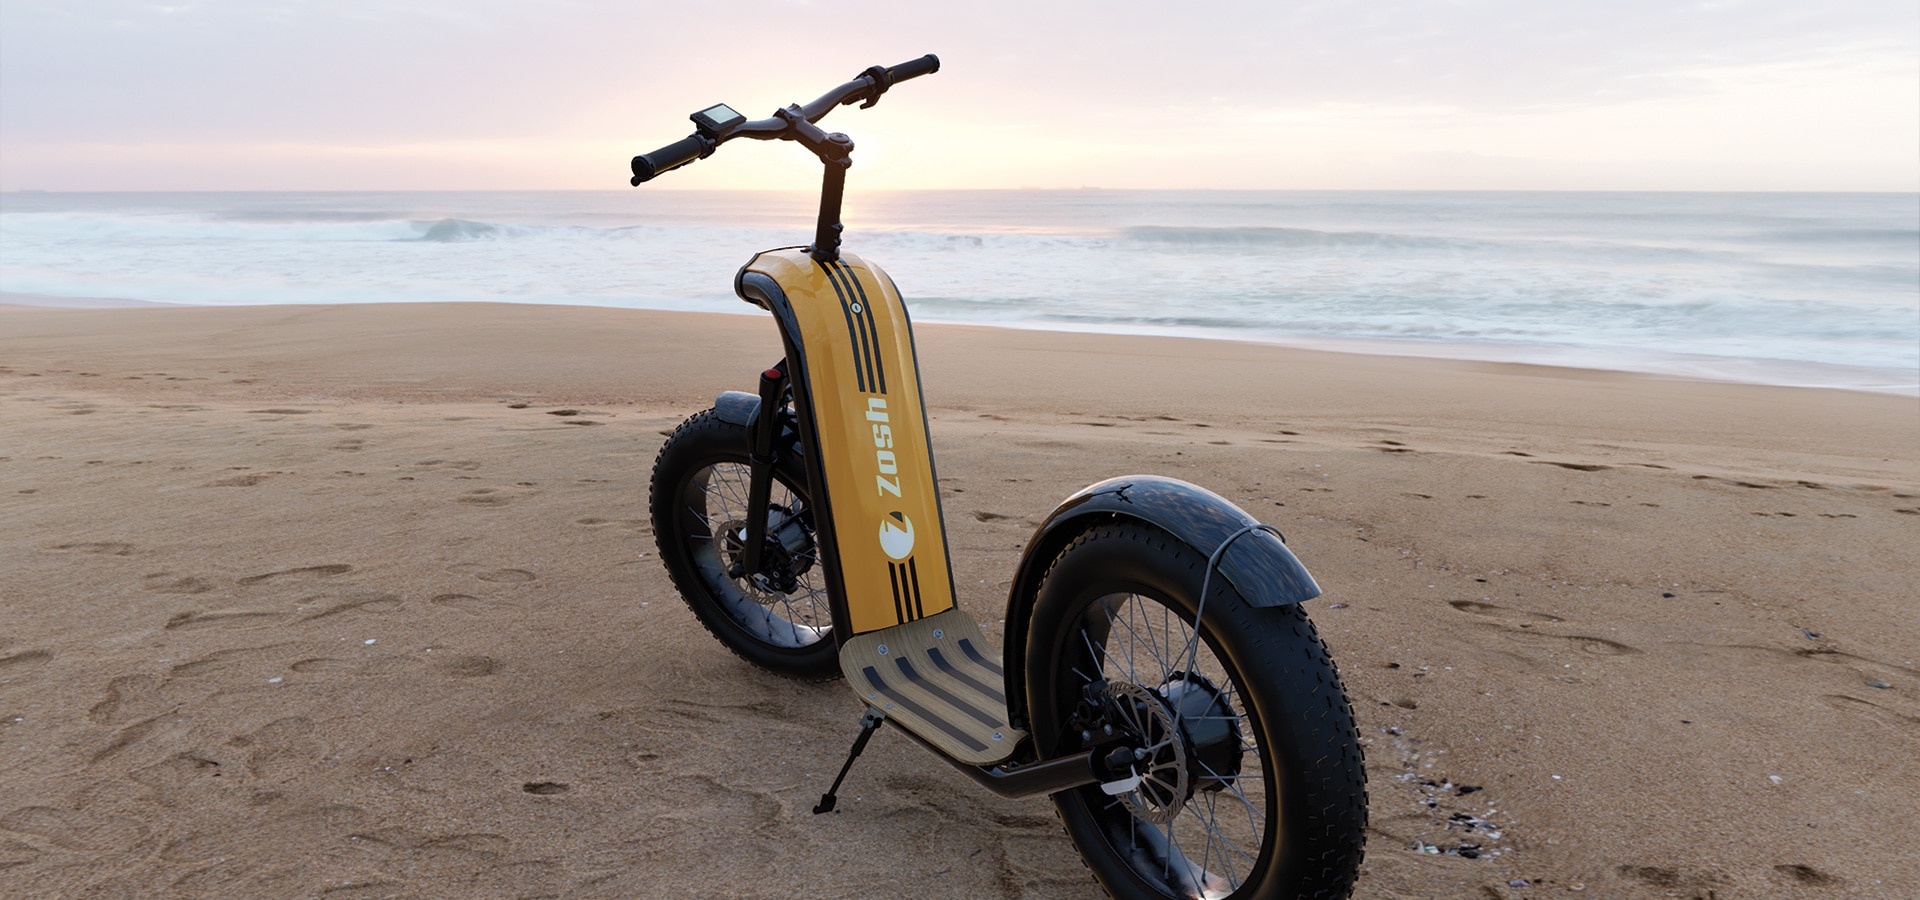 The all-terrain electric scooter made for the thrills and performance seekers